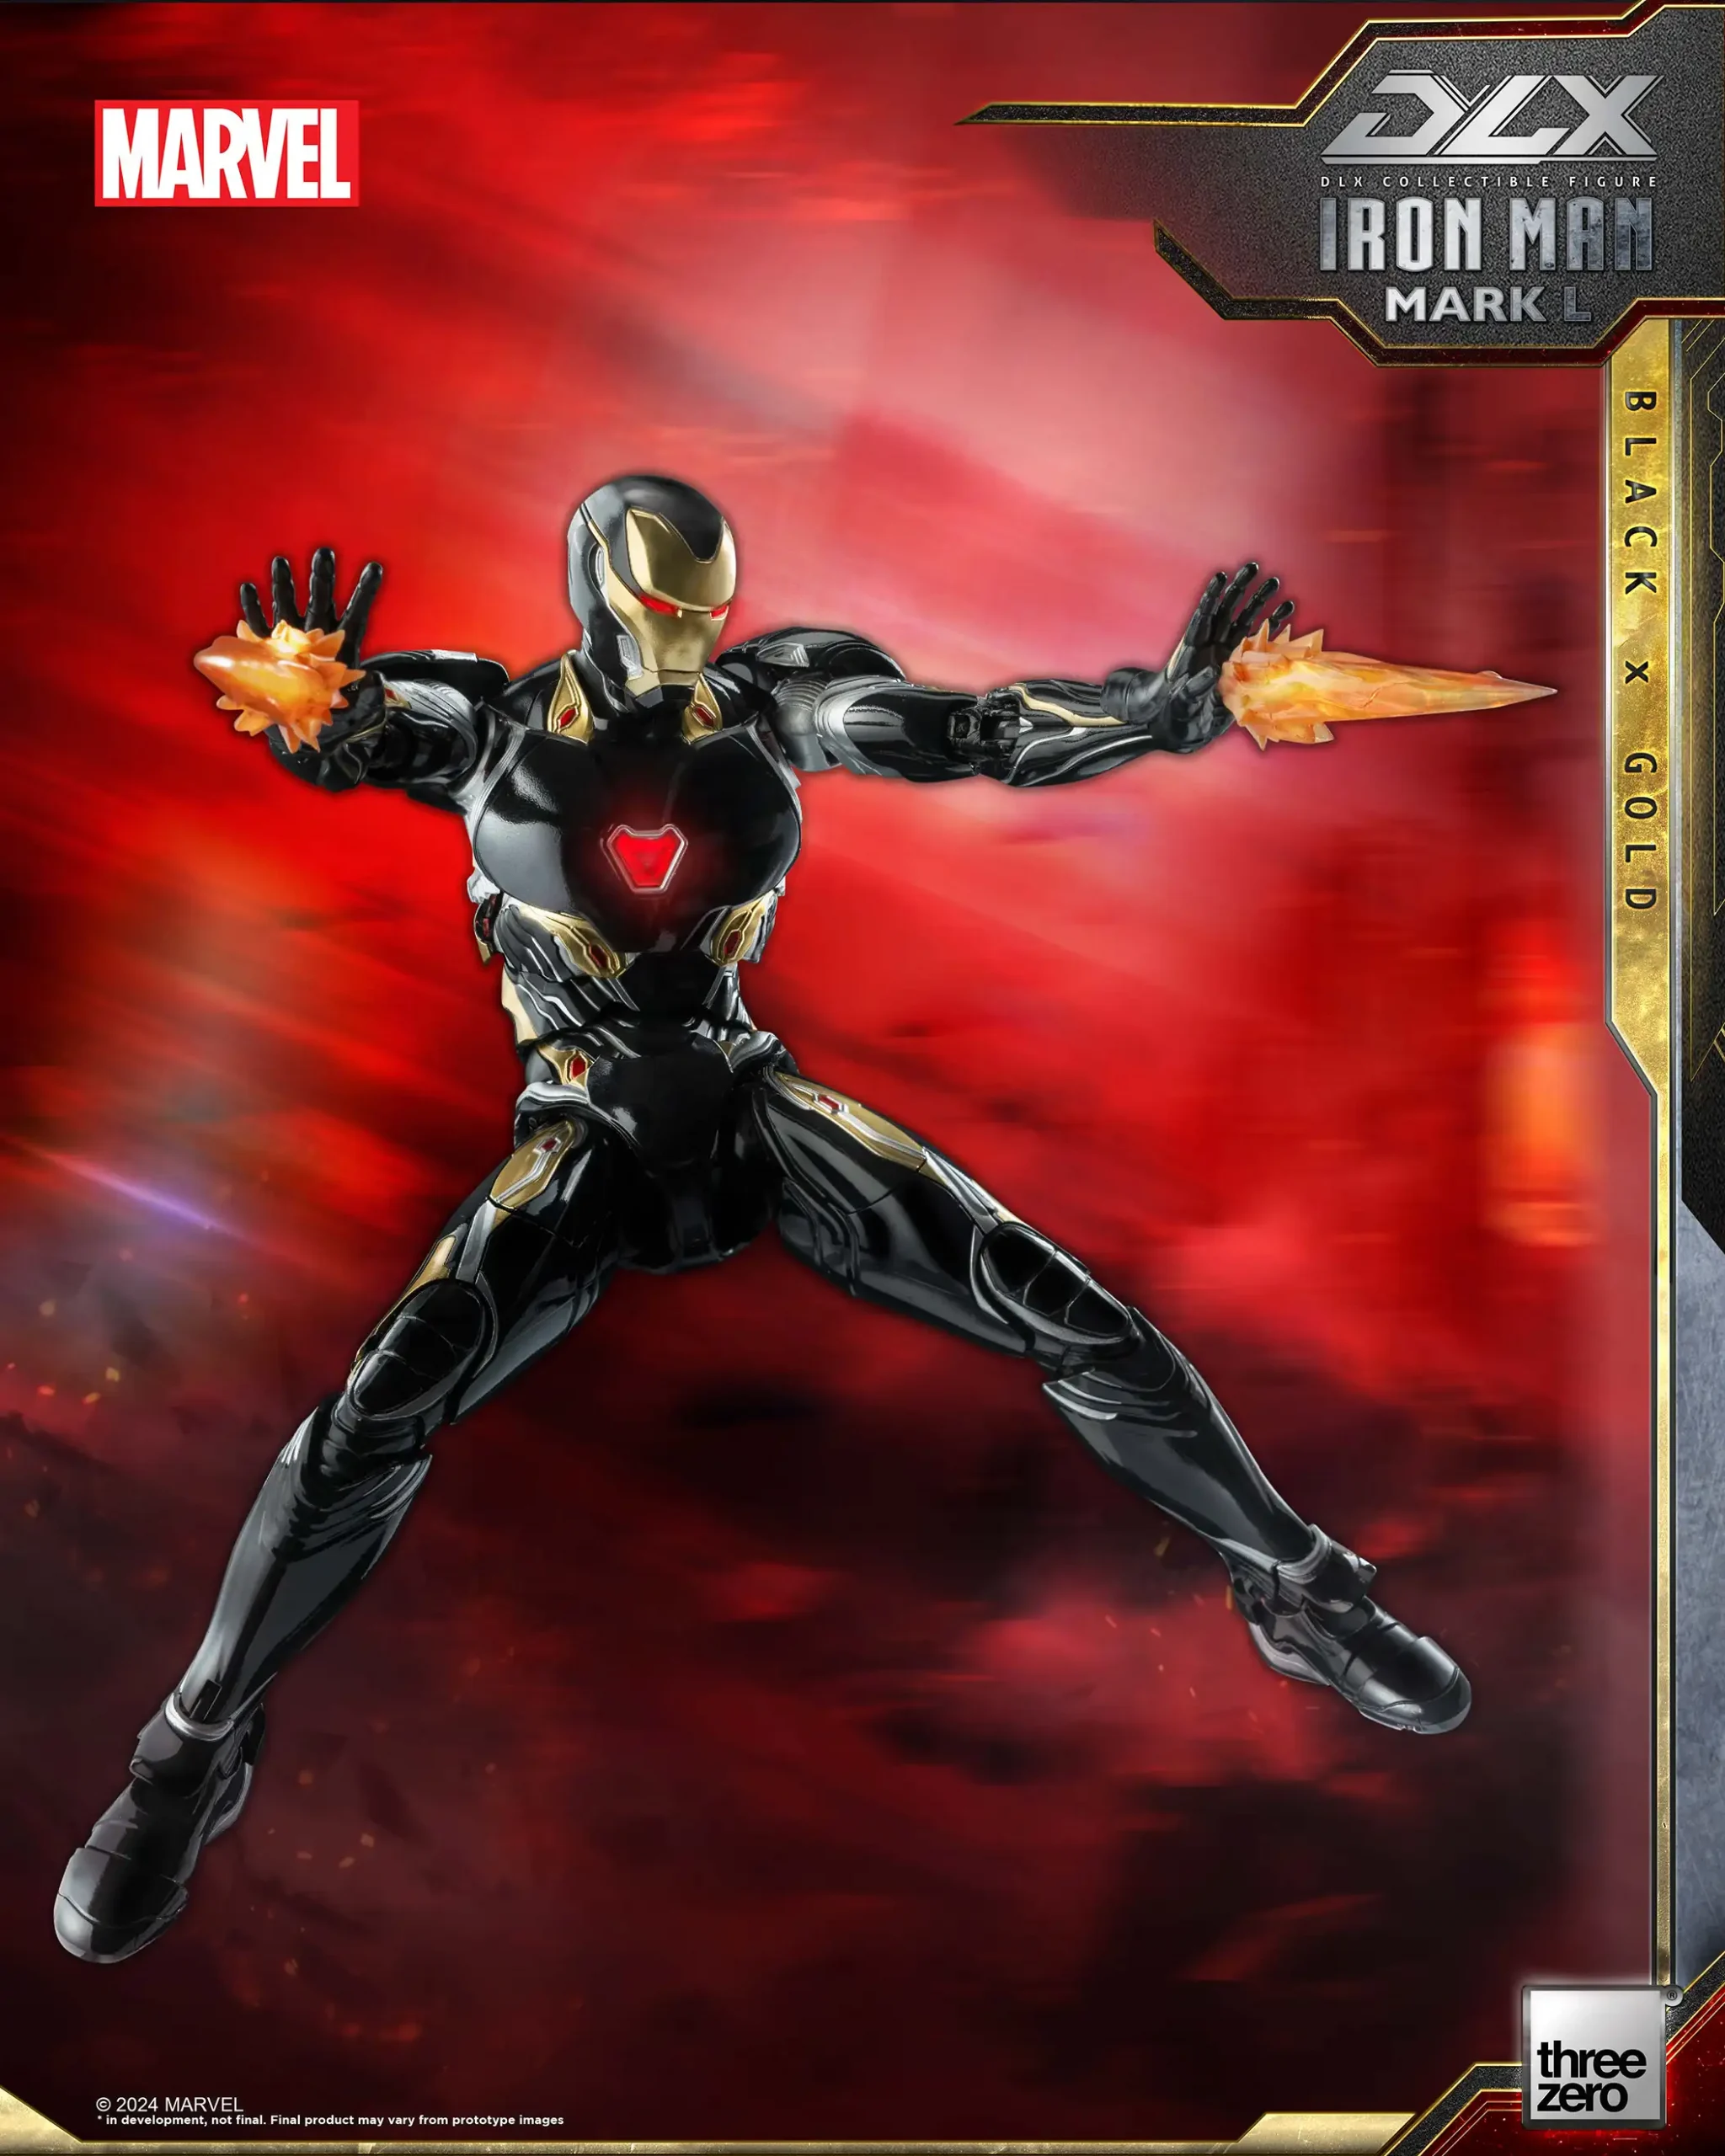 Black and Gold Iron Man armor | RPF Costume and Prop Maker Community